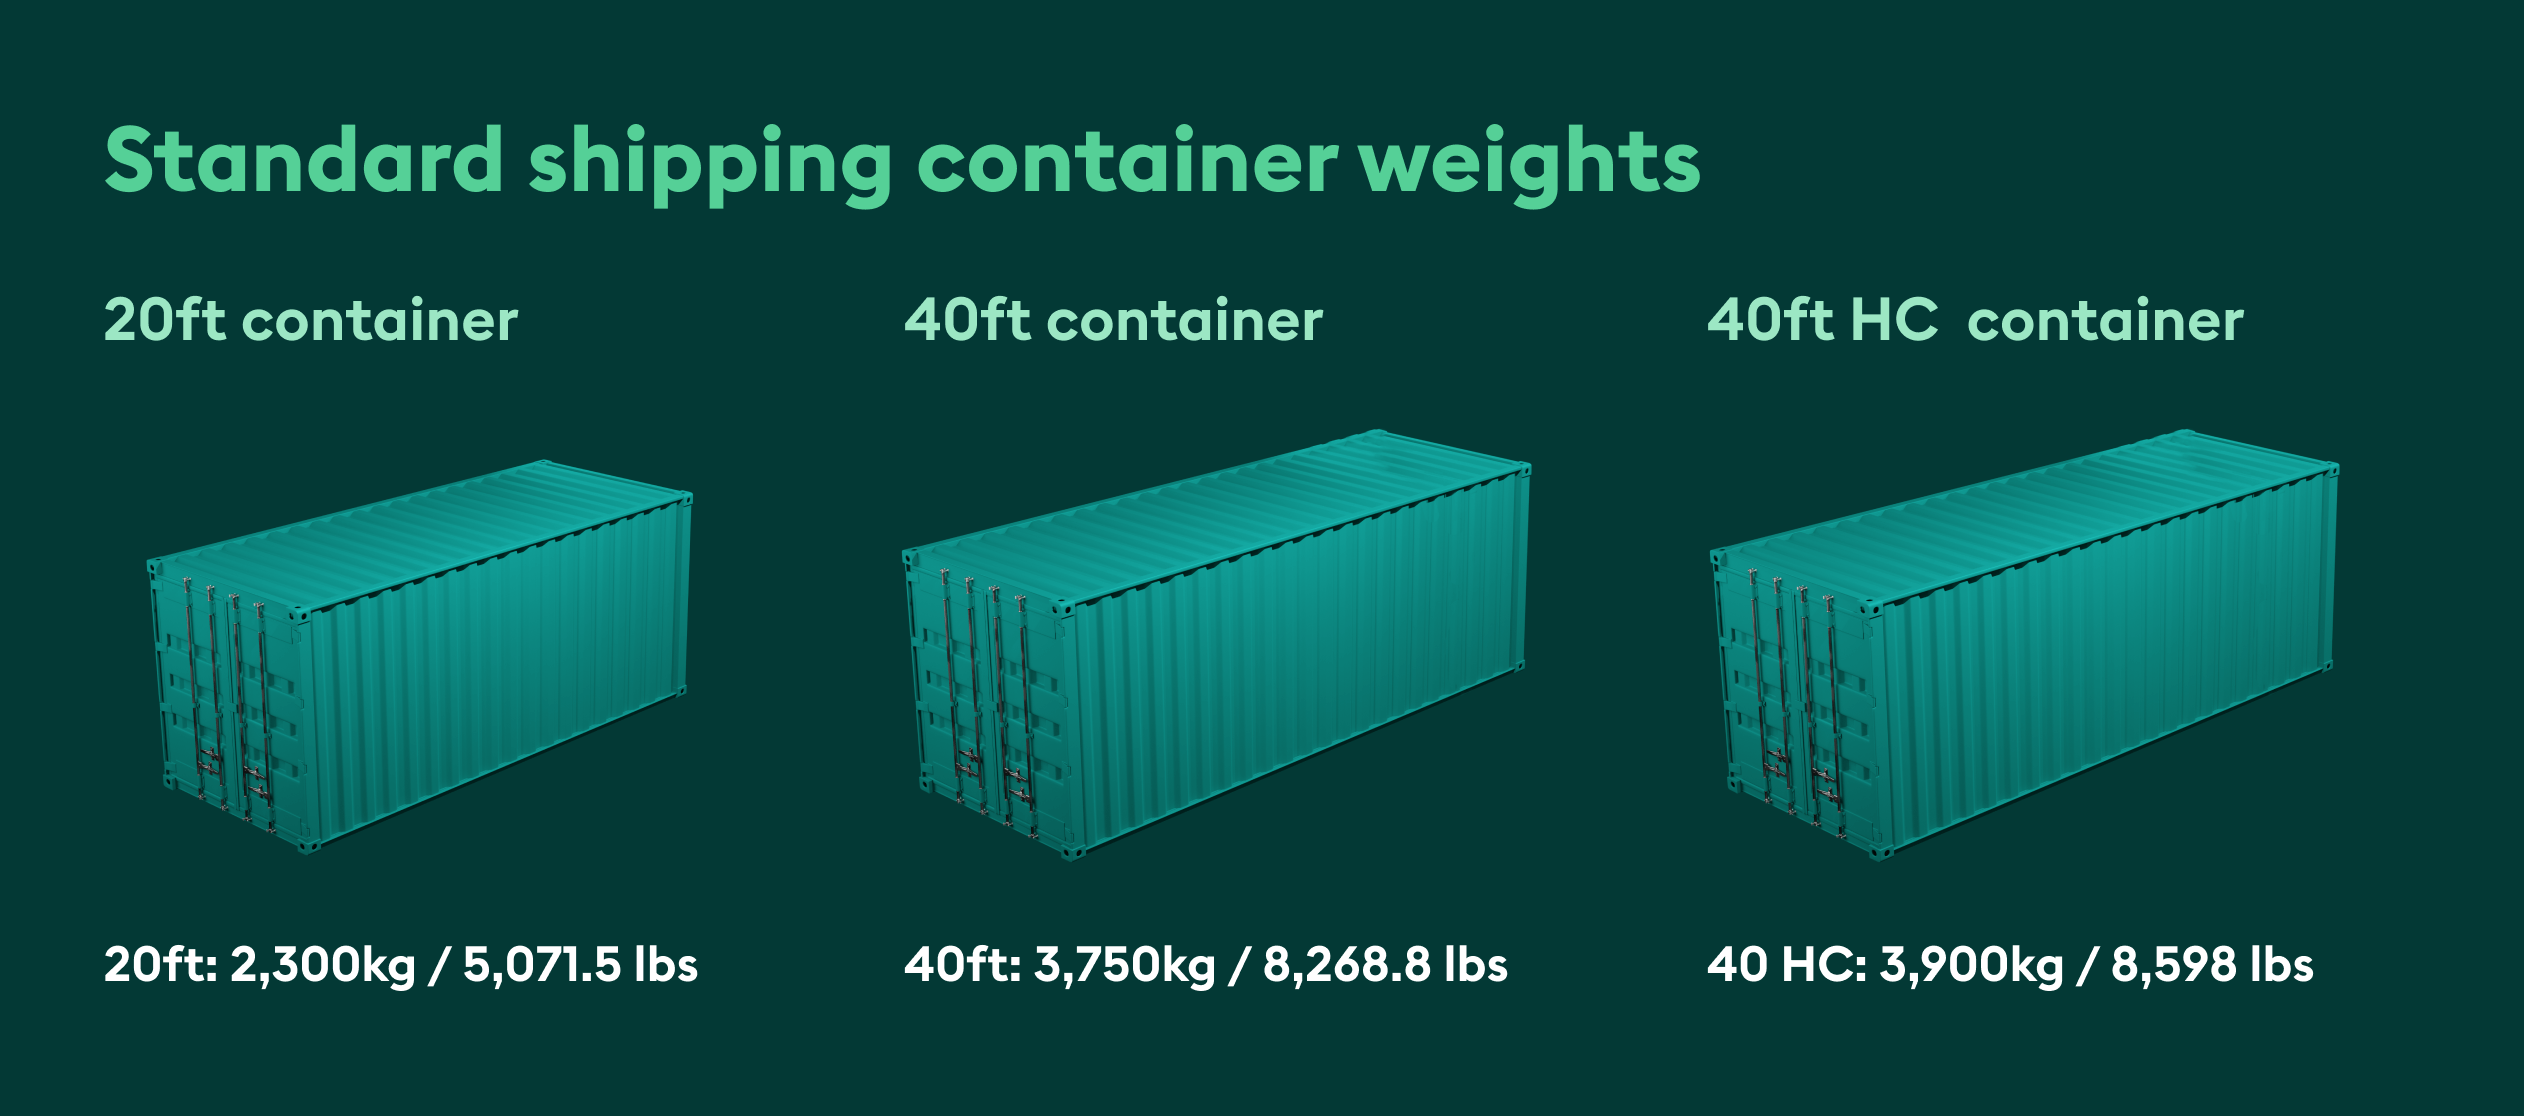 Standard shipping container weights